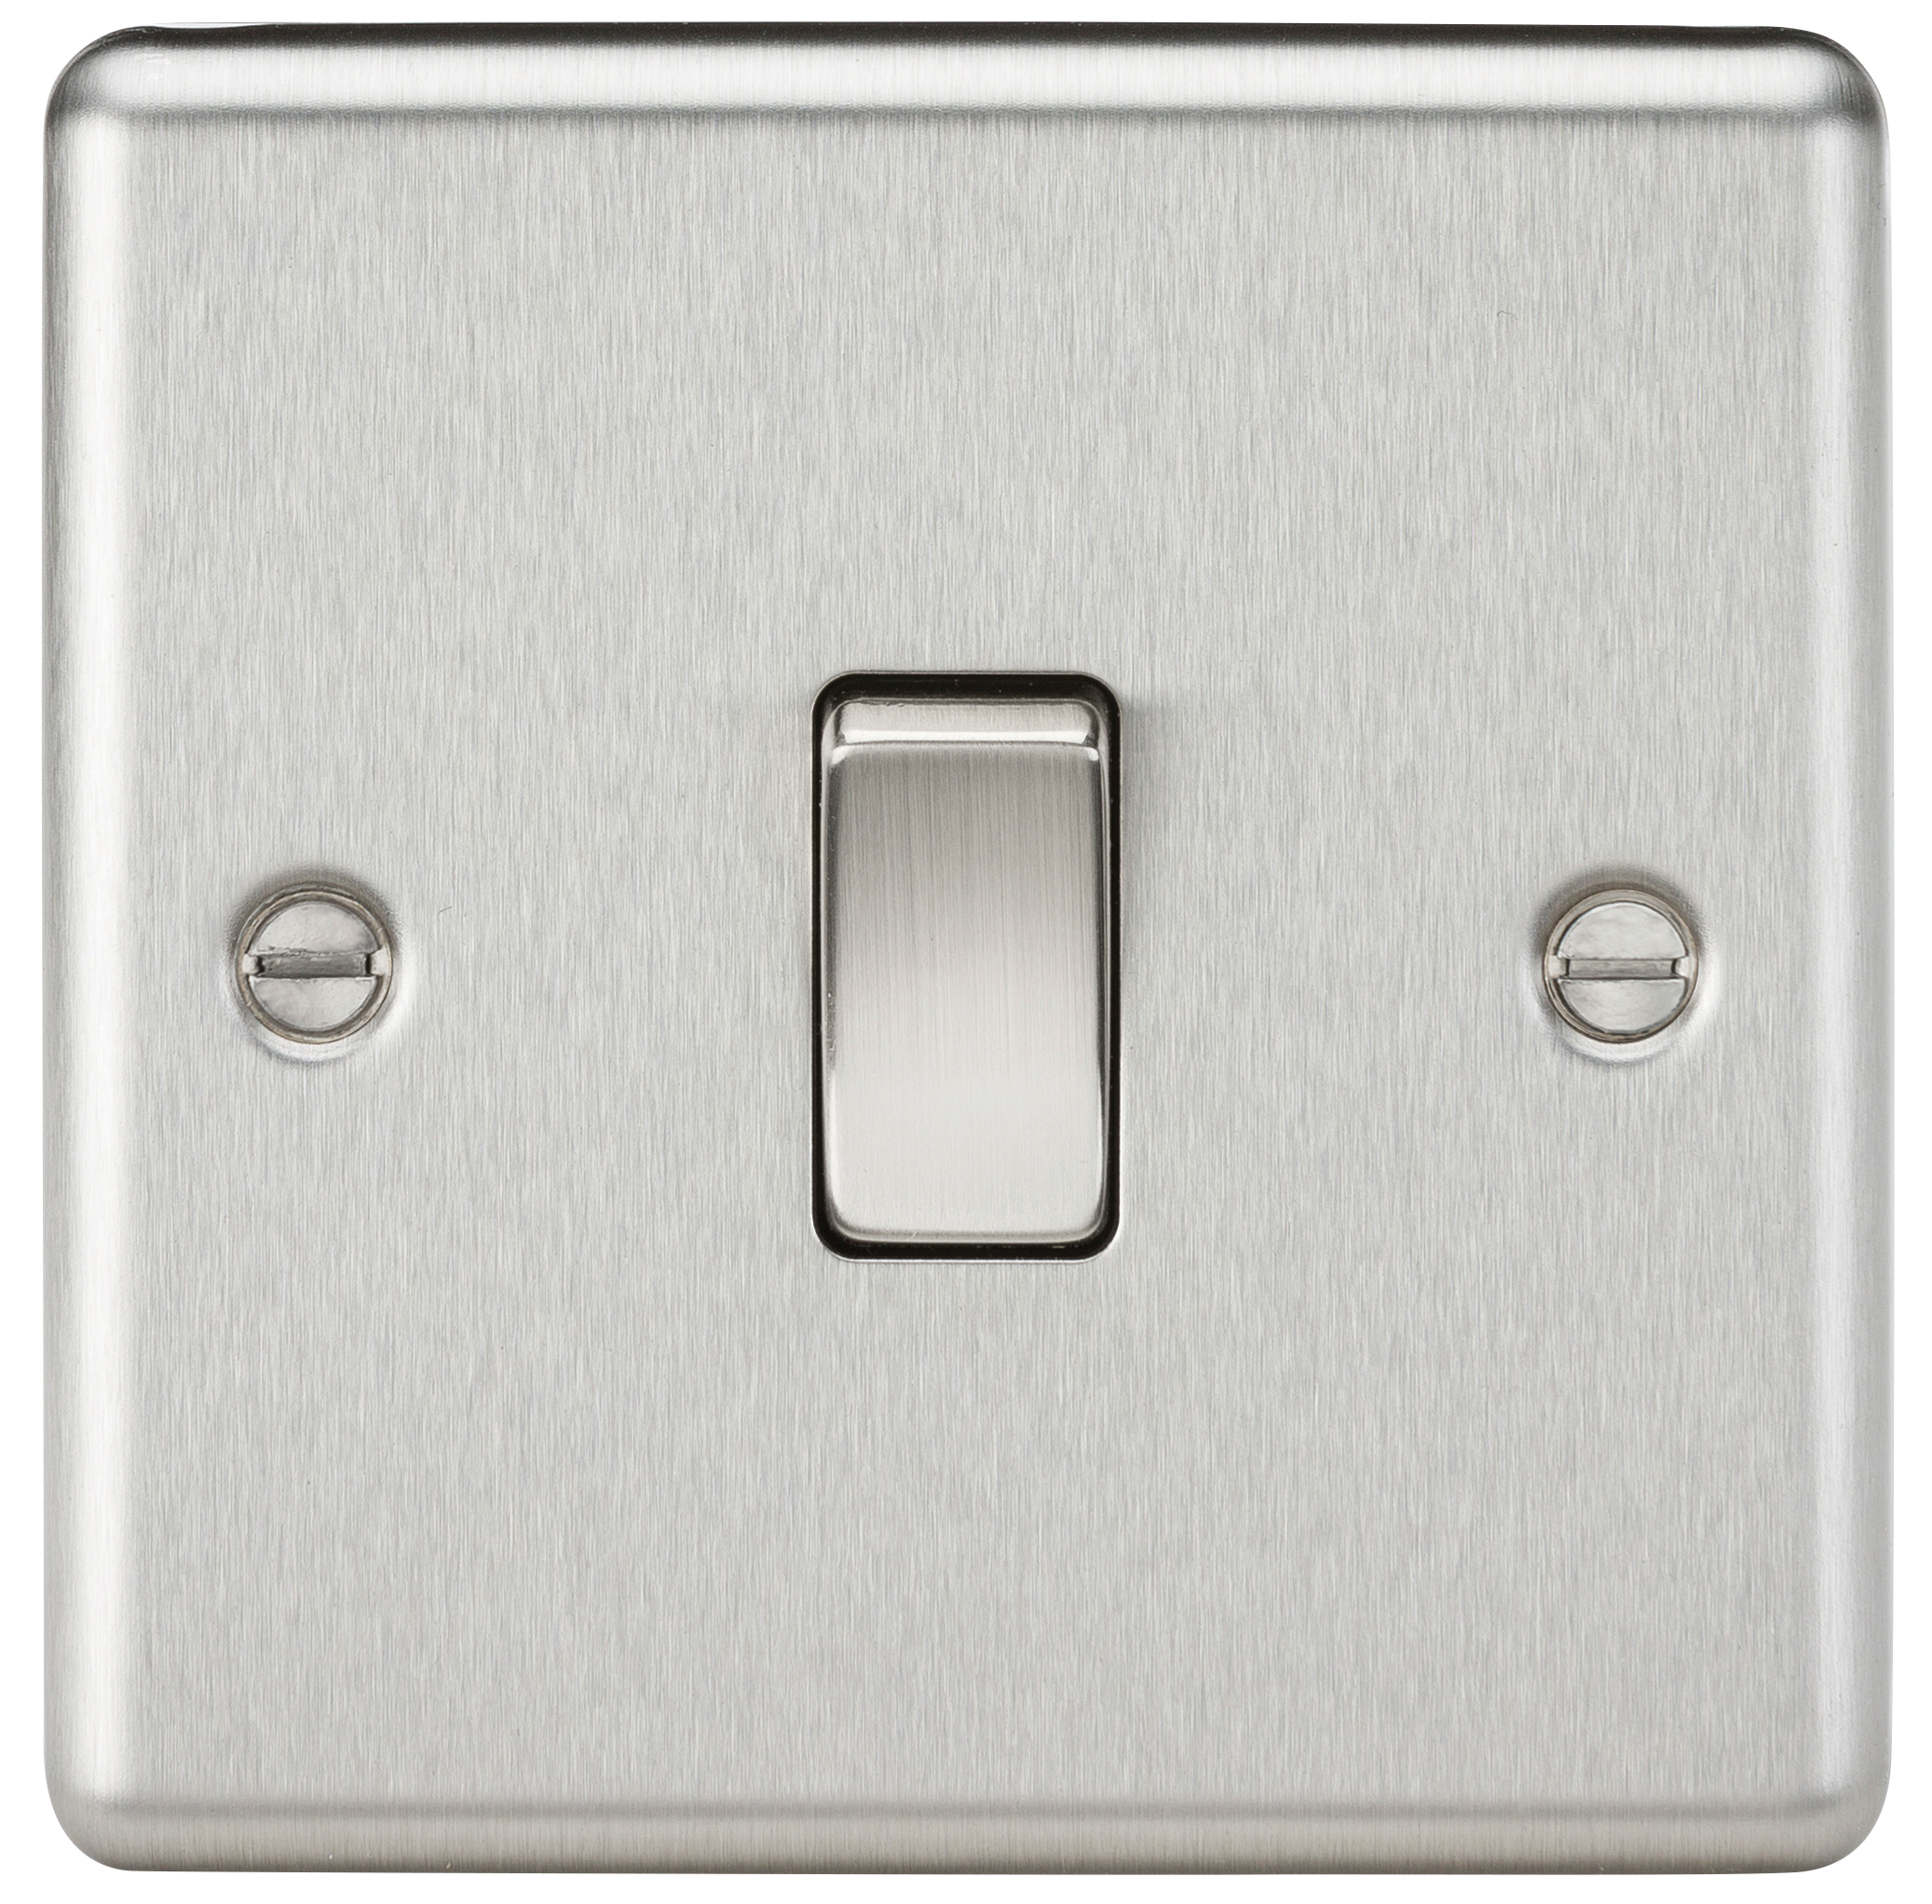 10A 1G 2 Way Plate Switch - Rounded Edge Brushed Chrome - CL2BC 